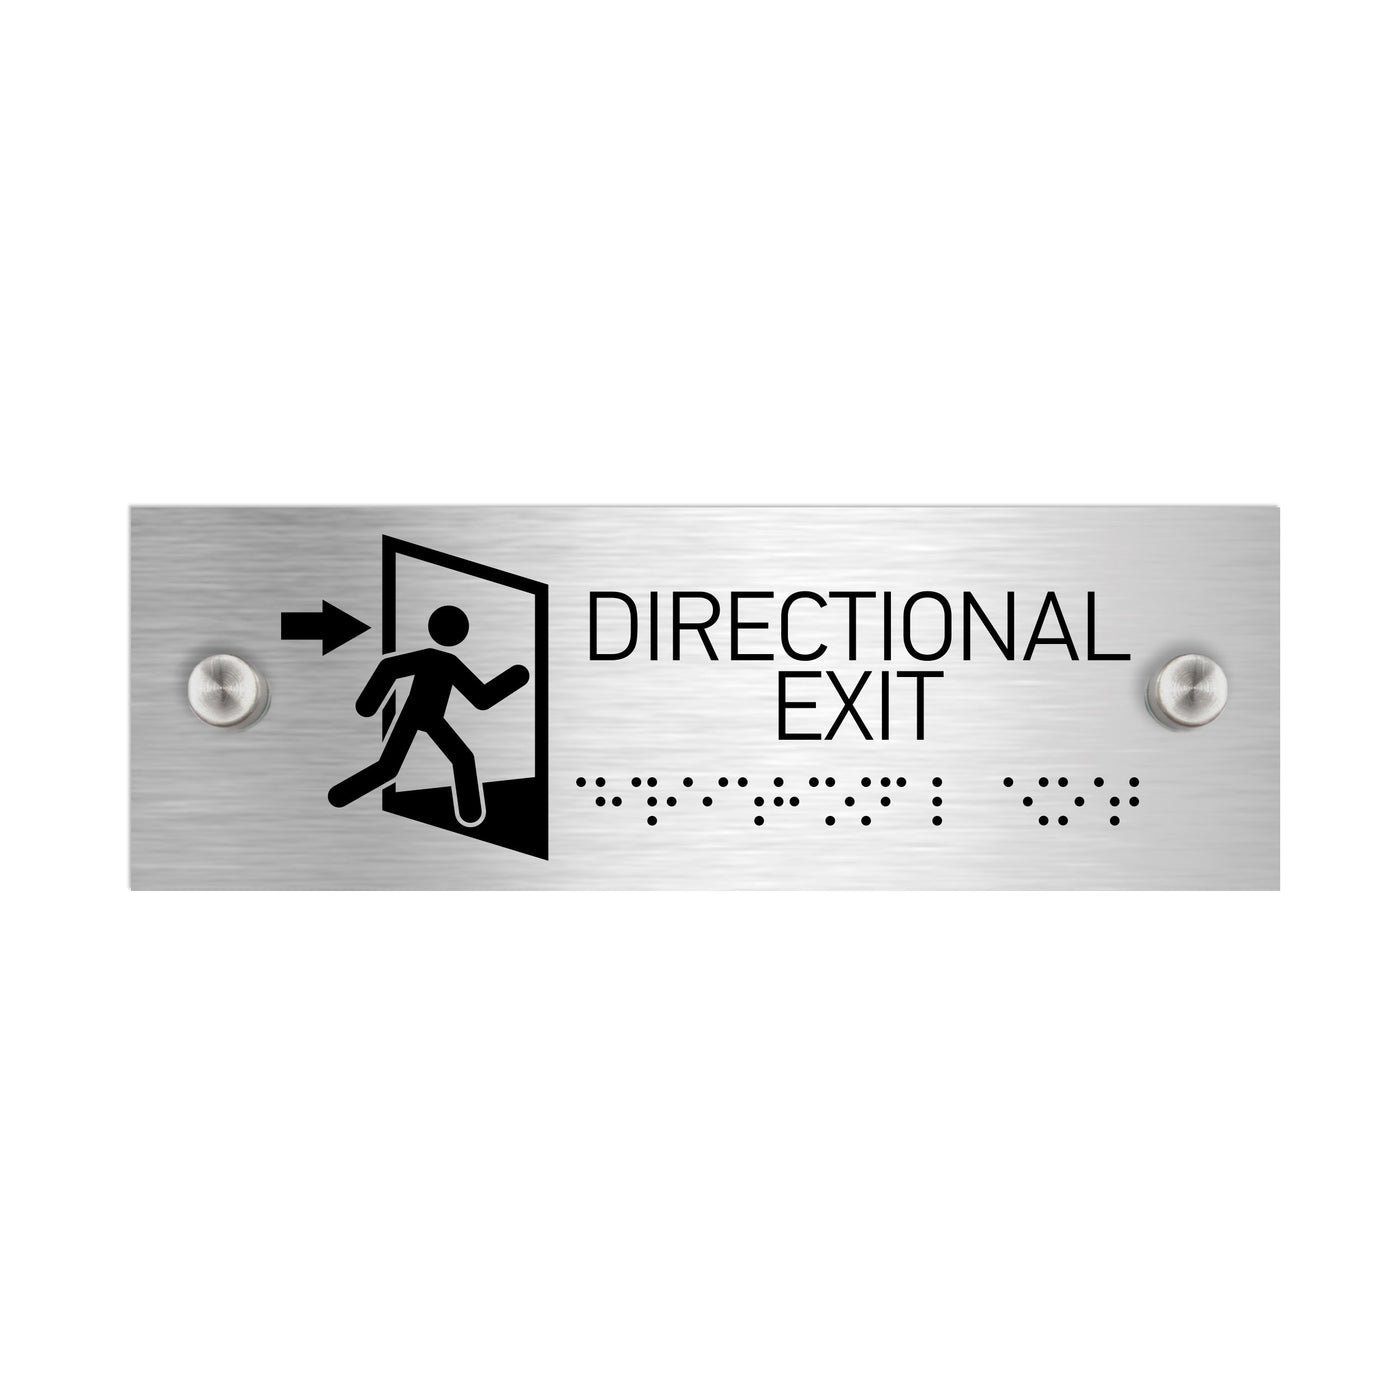 Information Signs - Directional Exit Stainless Steel Braille Door Sign